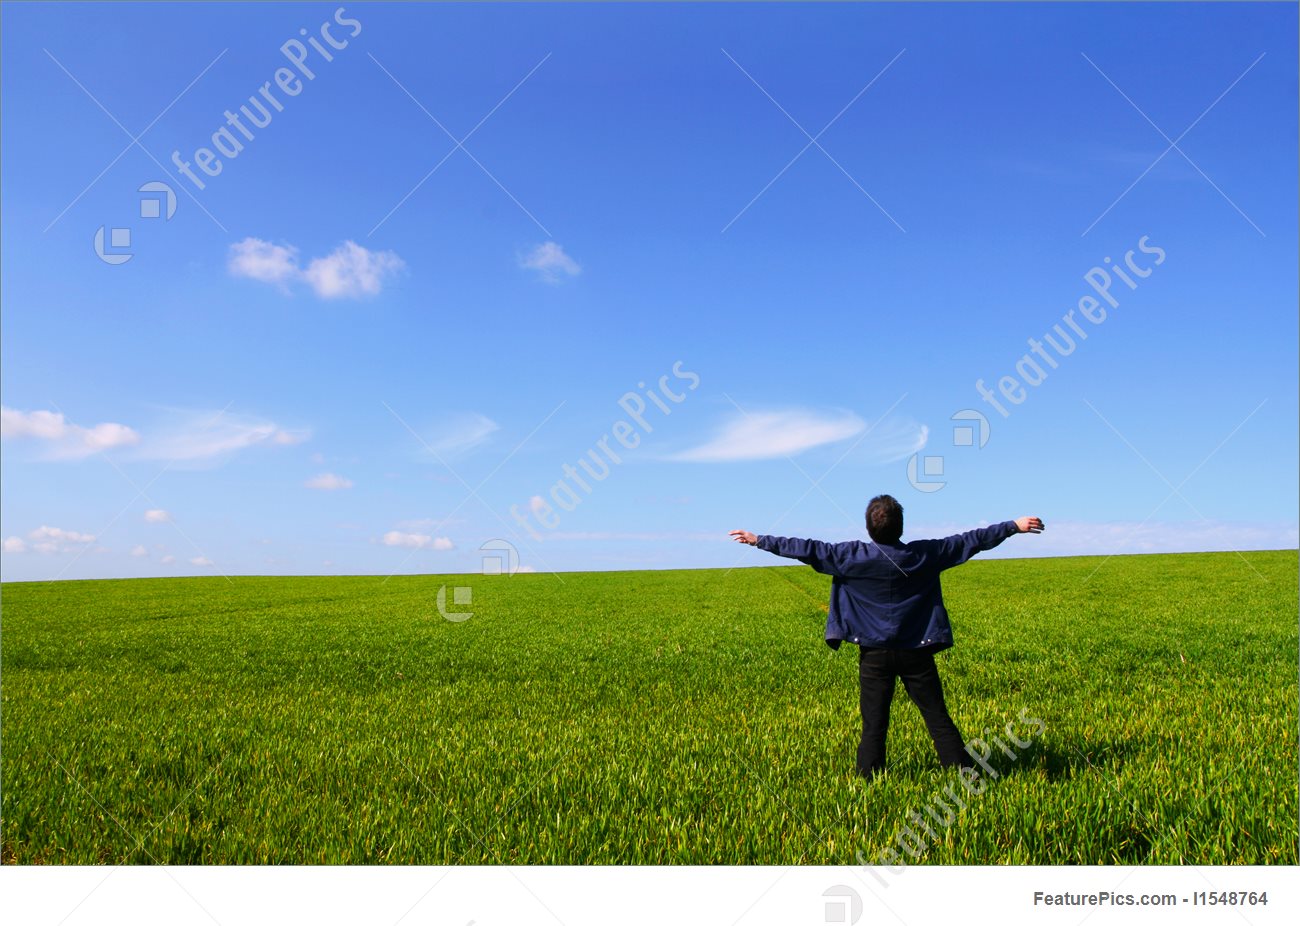 A man alone in a green field, breathing the air with open arms